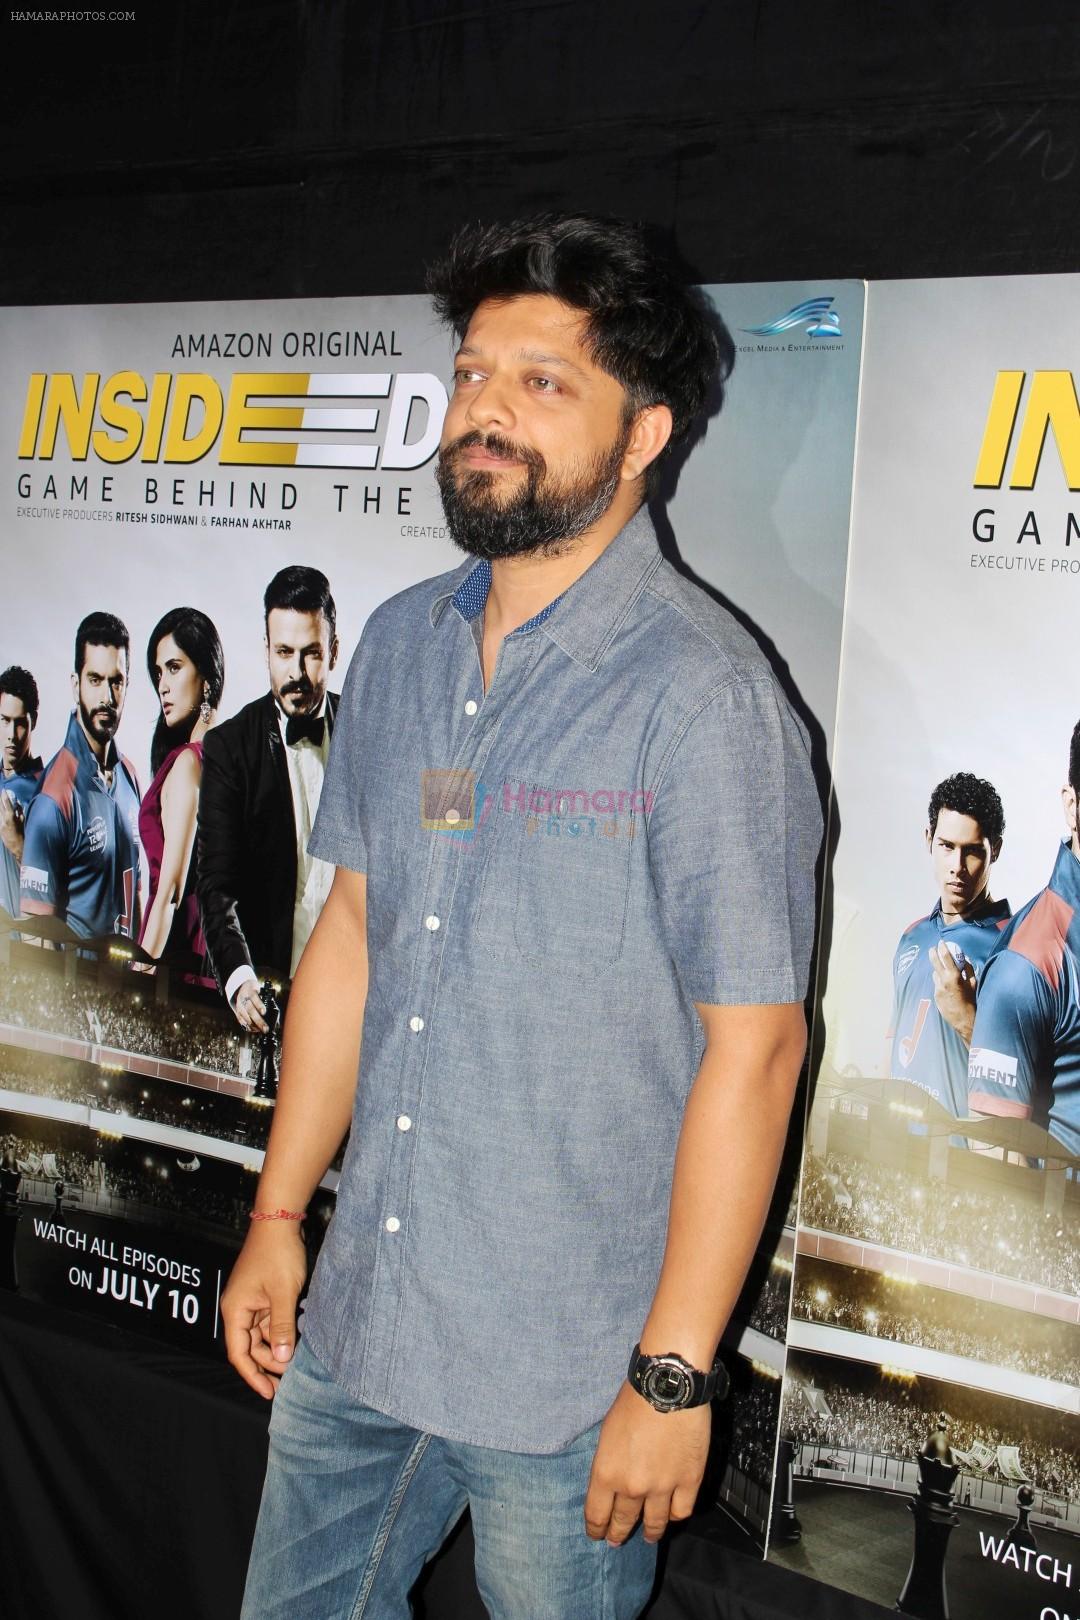 at the Special Screening Of Web Series Inside Edge on 7th July 2017